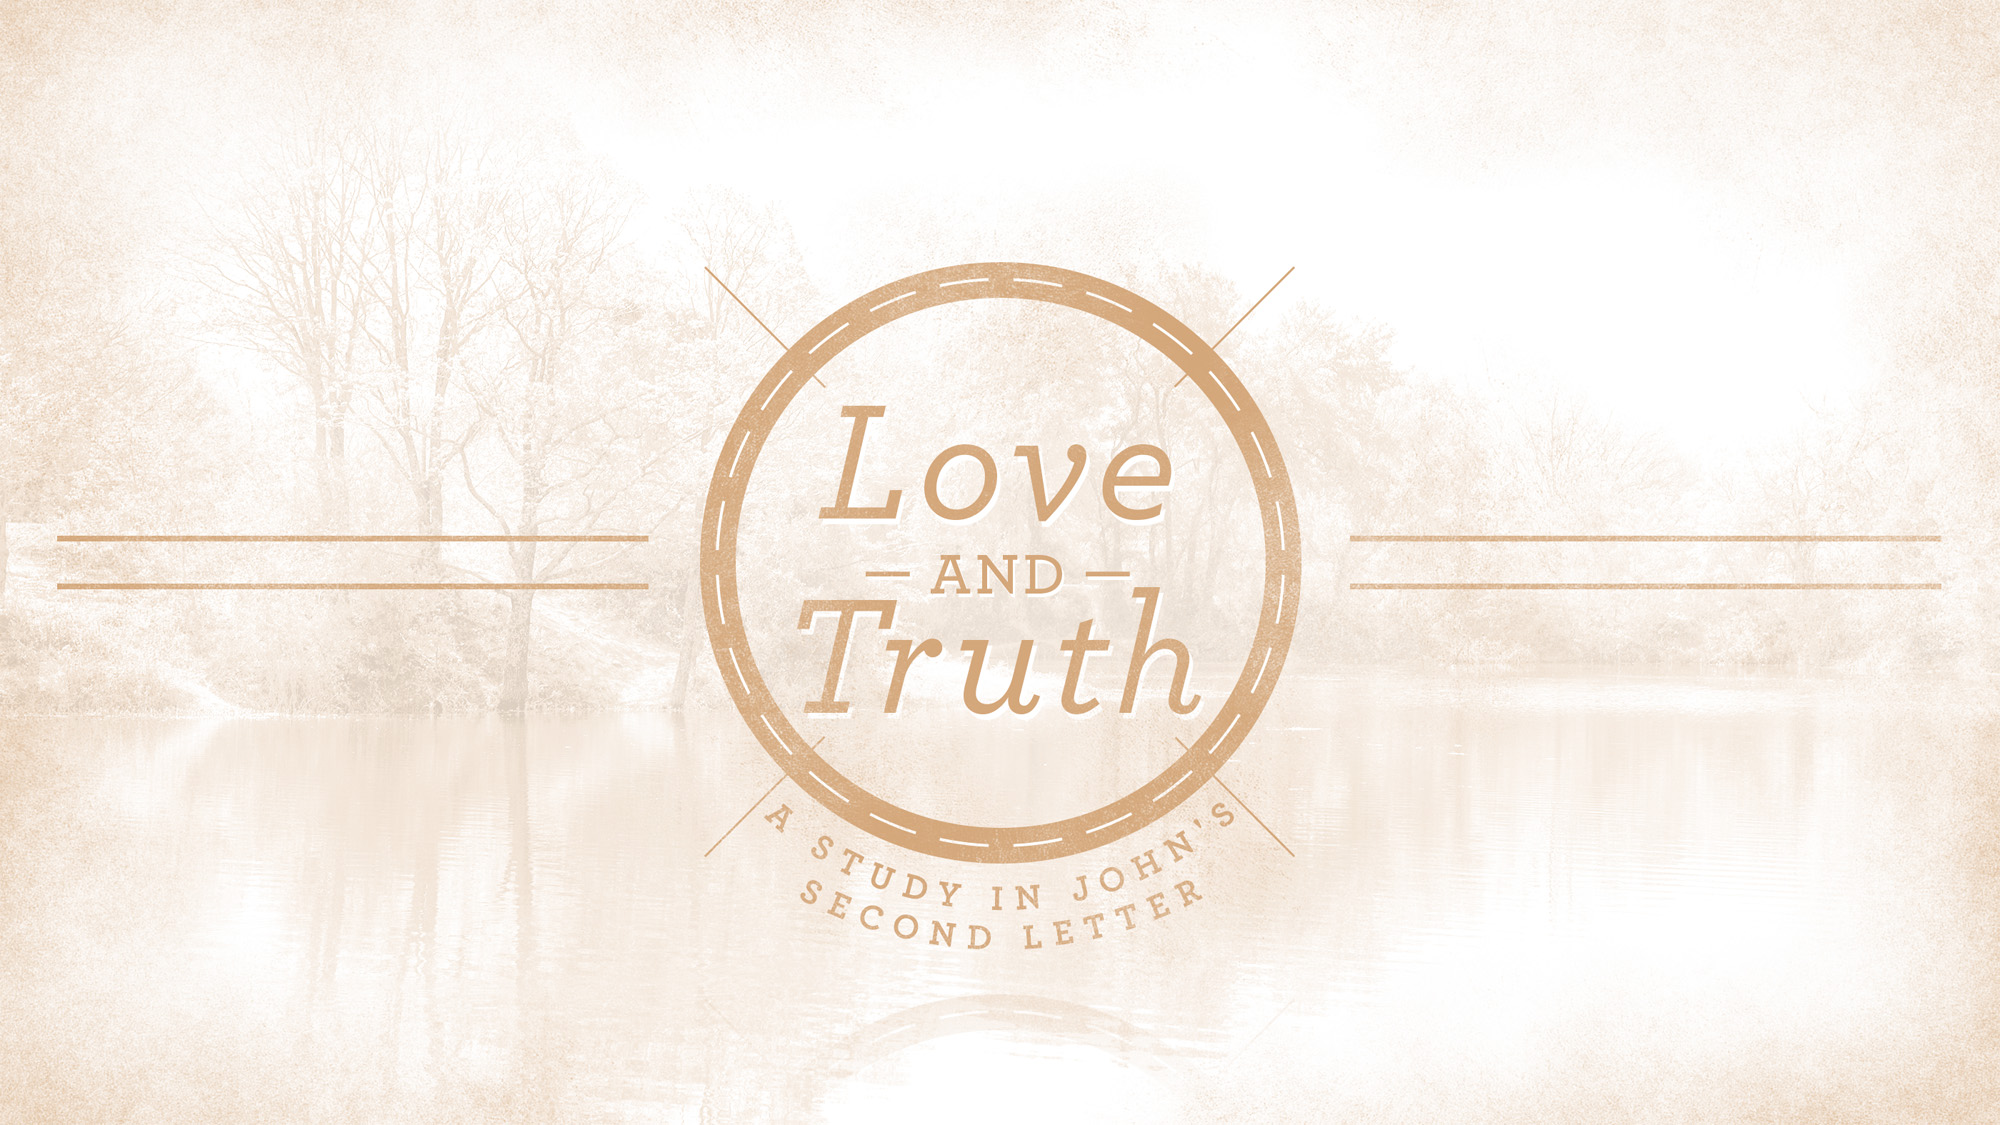 Love & Truth - Truth Matters (patchy audio)